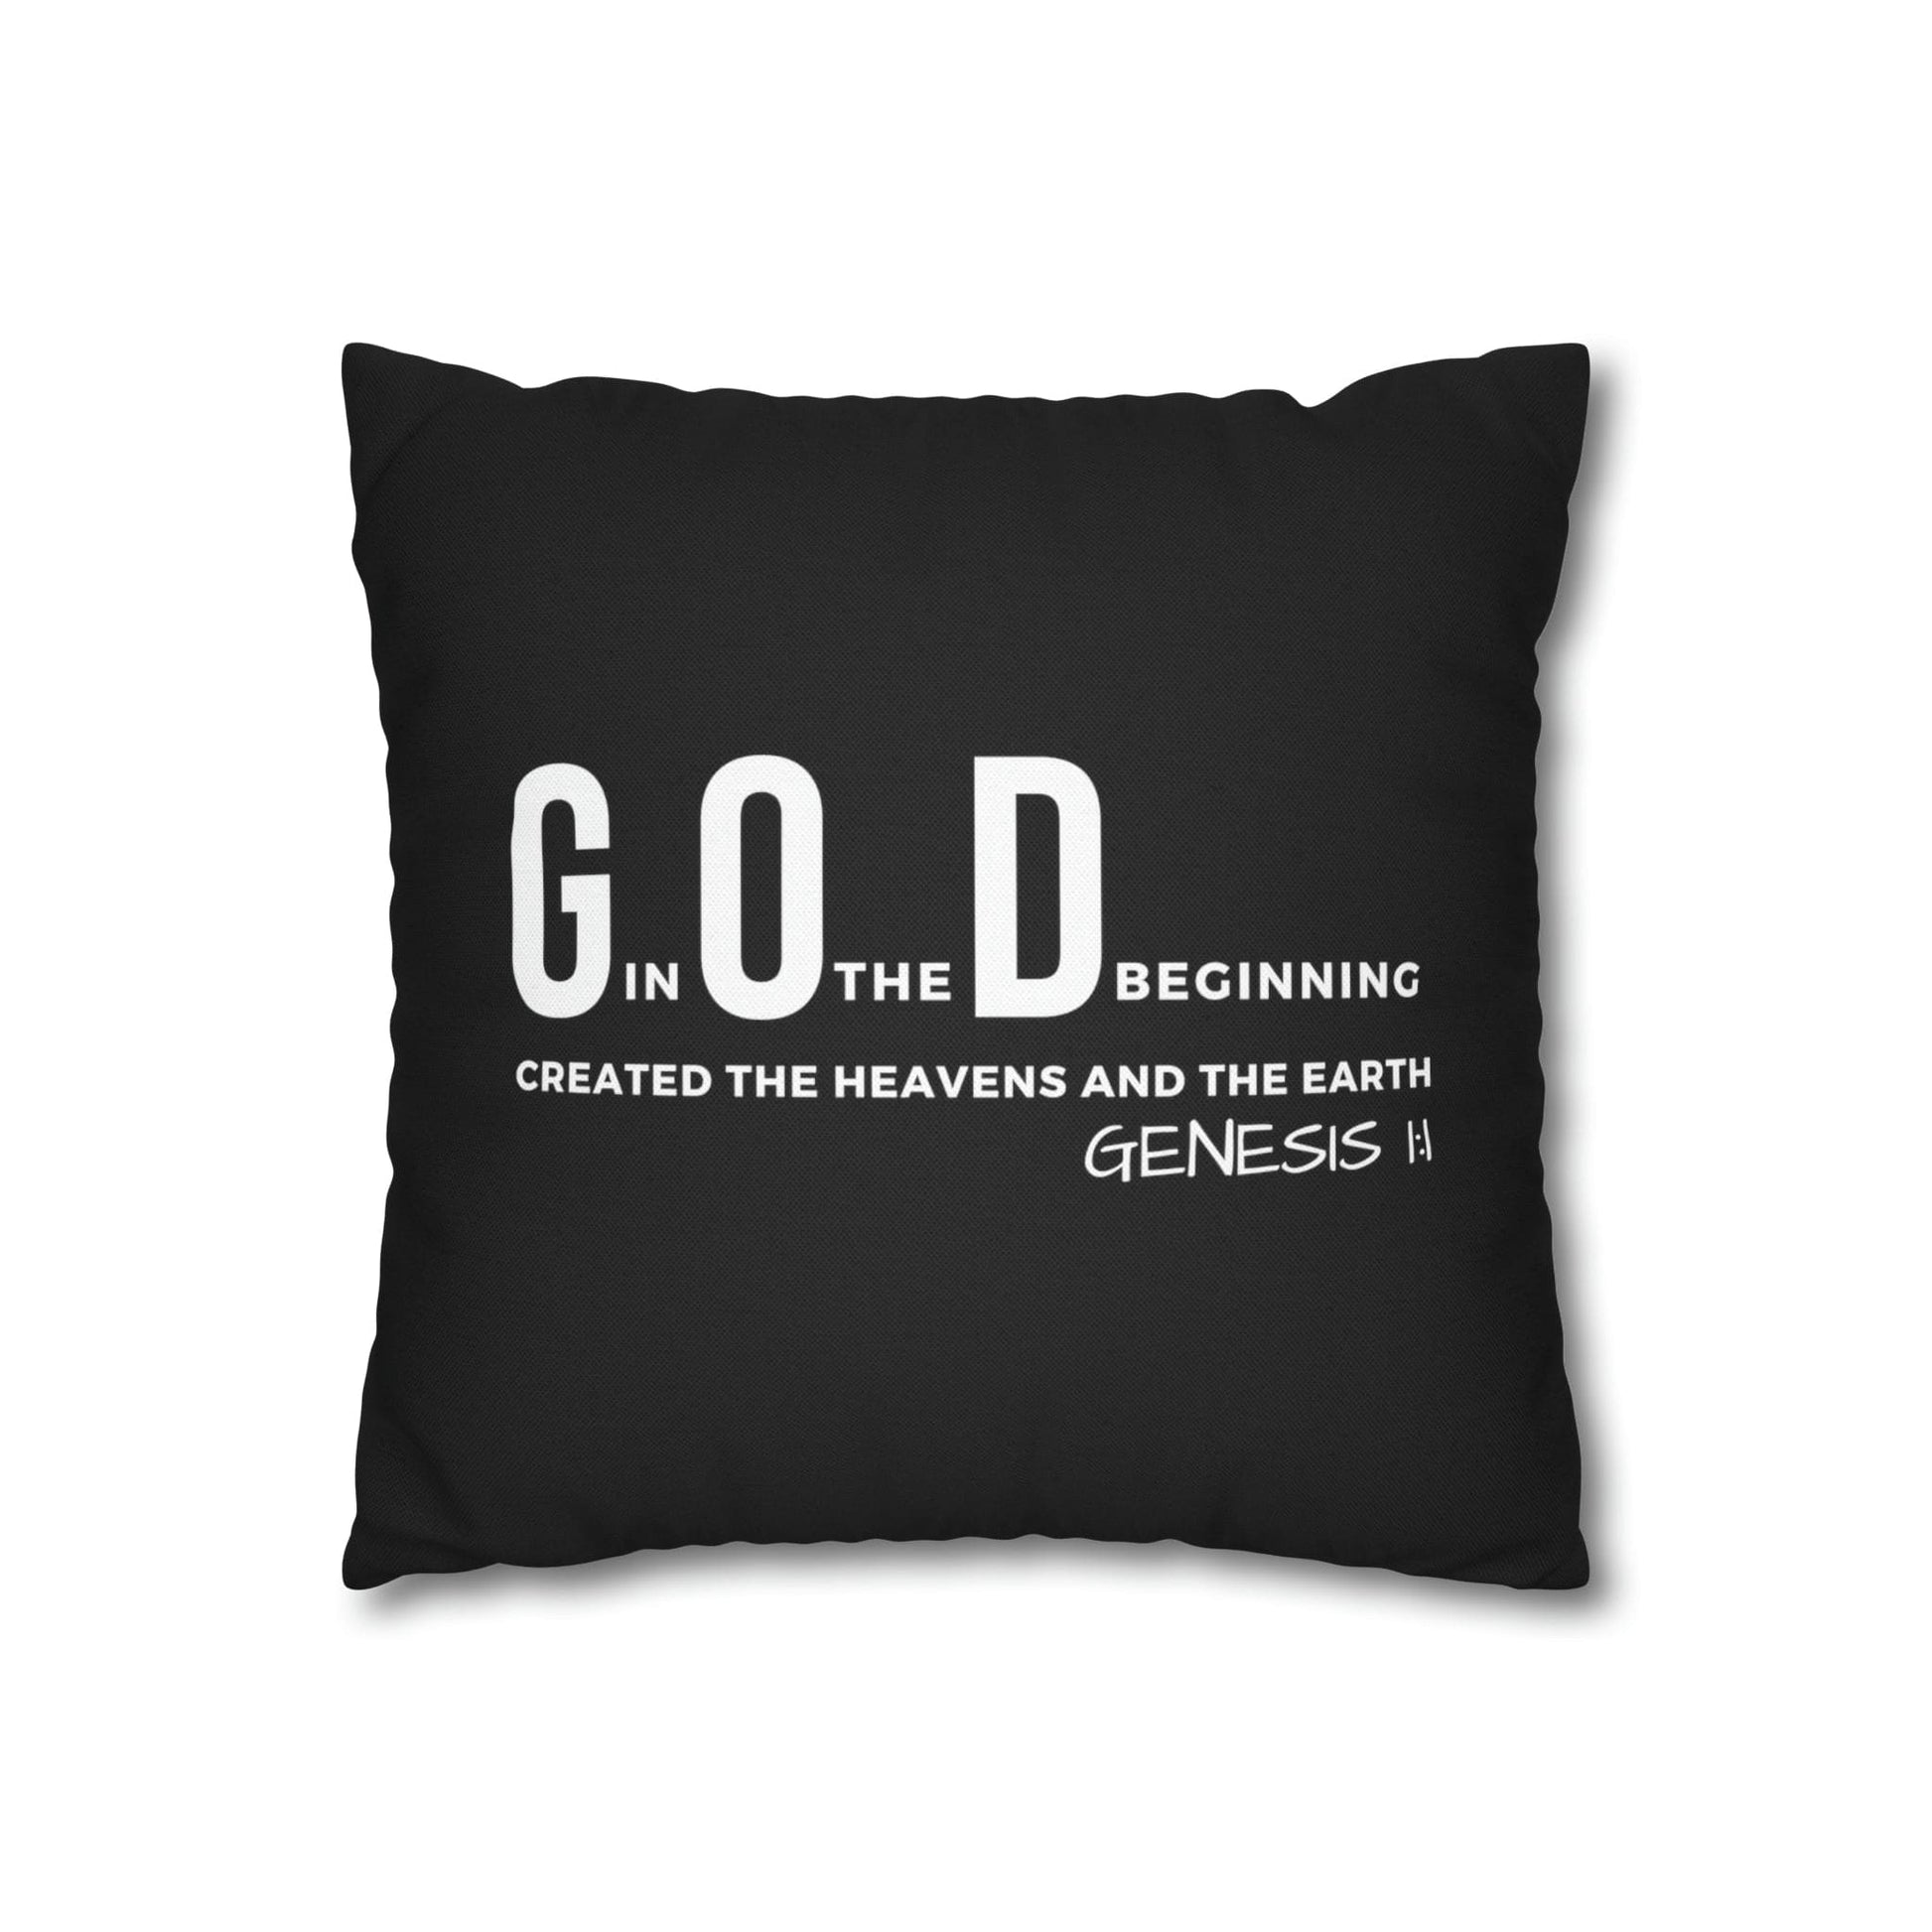 Decorative Throw Pillow Cover - Set Of 2, God In The Beginning Created The Heavens And The Earth - Scripture Verse-11